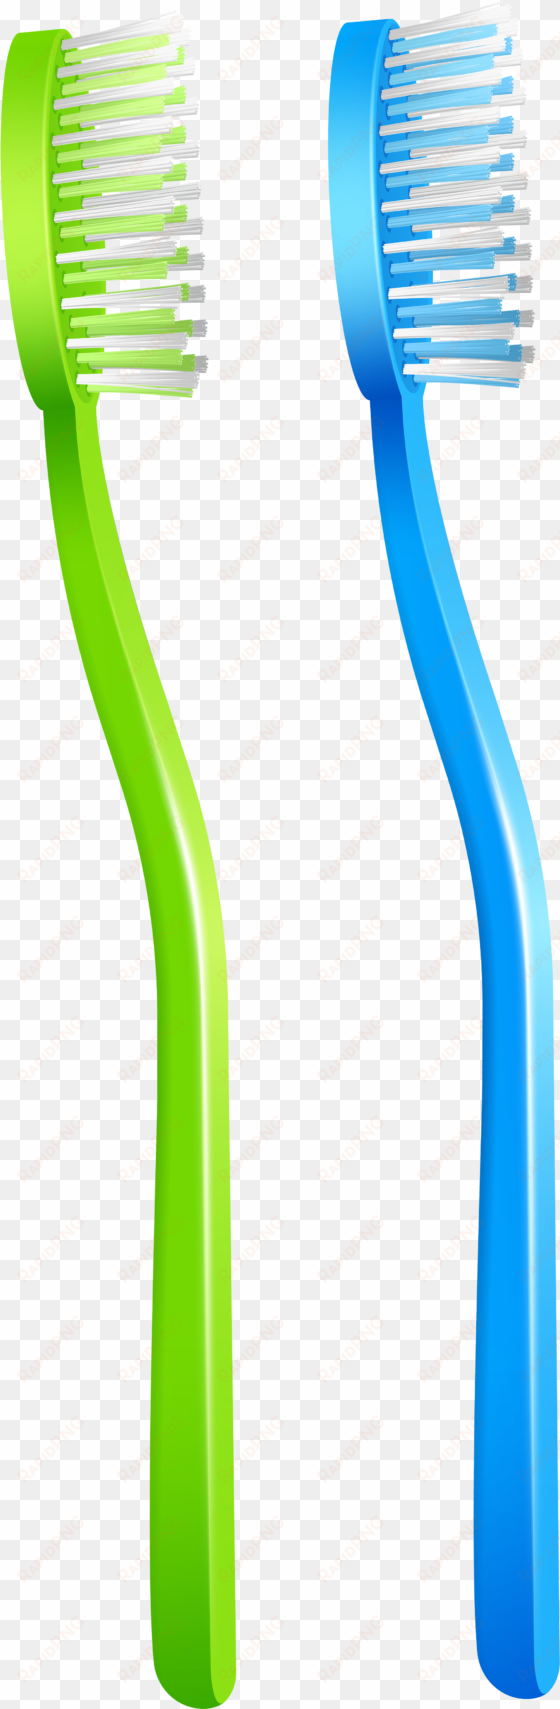 Green Blue Toothbrush Png Clip Art - Toothbrush Clipart Png transparent png image